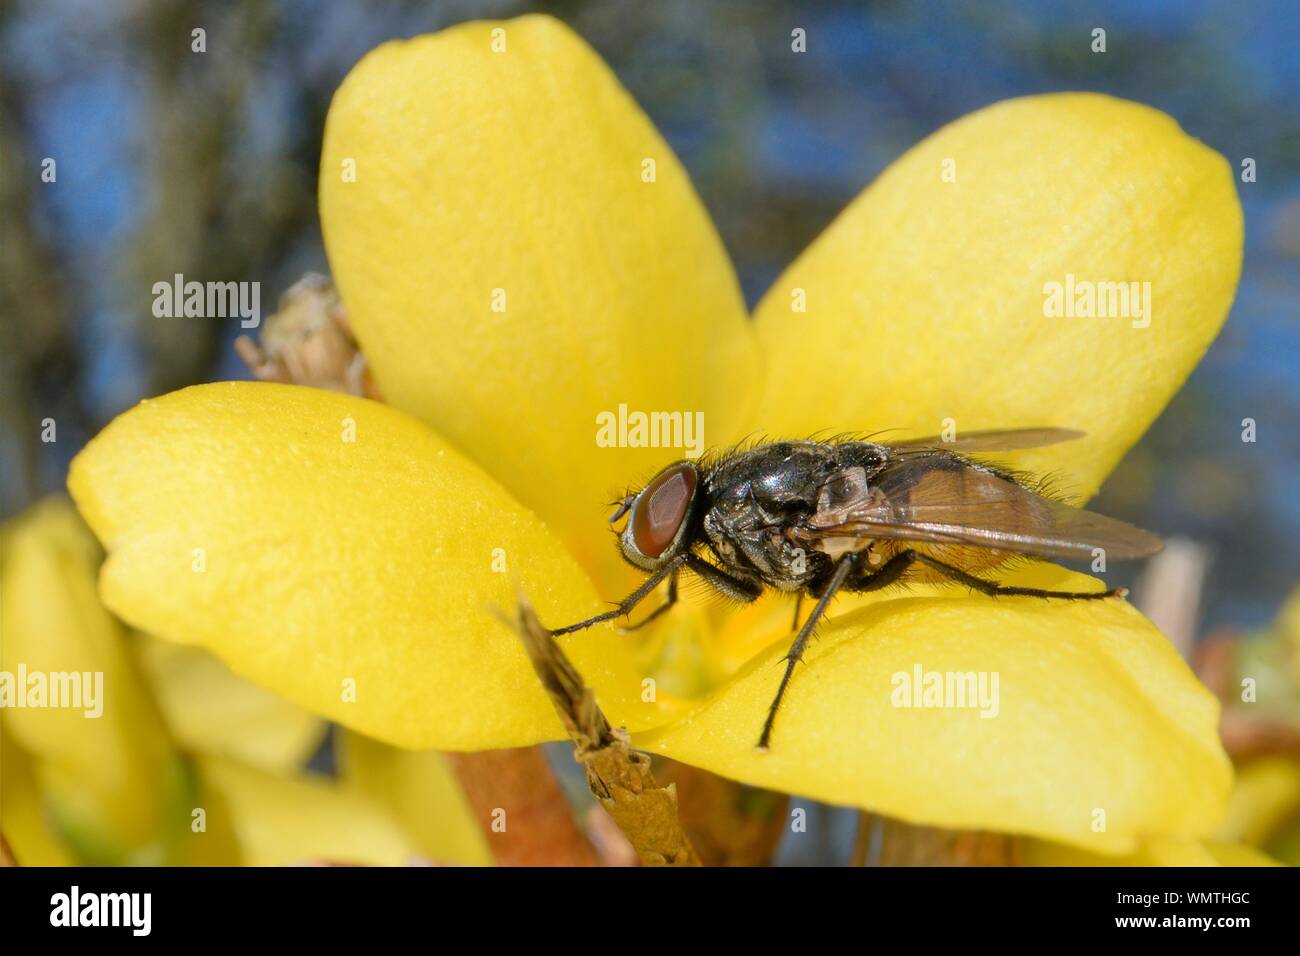 Face fly / Autumn house fly (Musca autumnalis) sunning on a Forsythia flower, Wiltshire garden, UK, March. Stock Photo